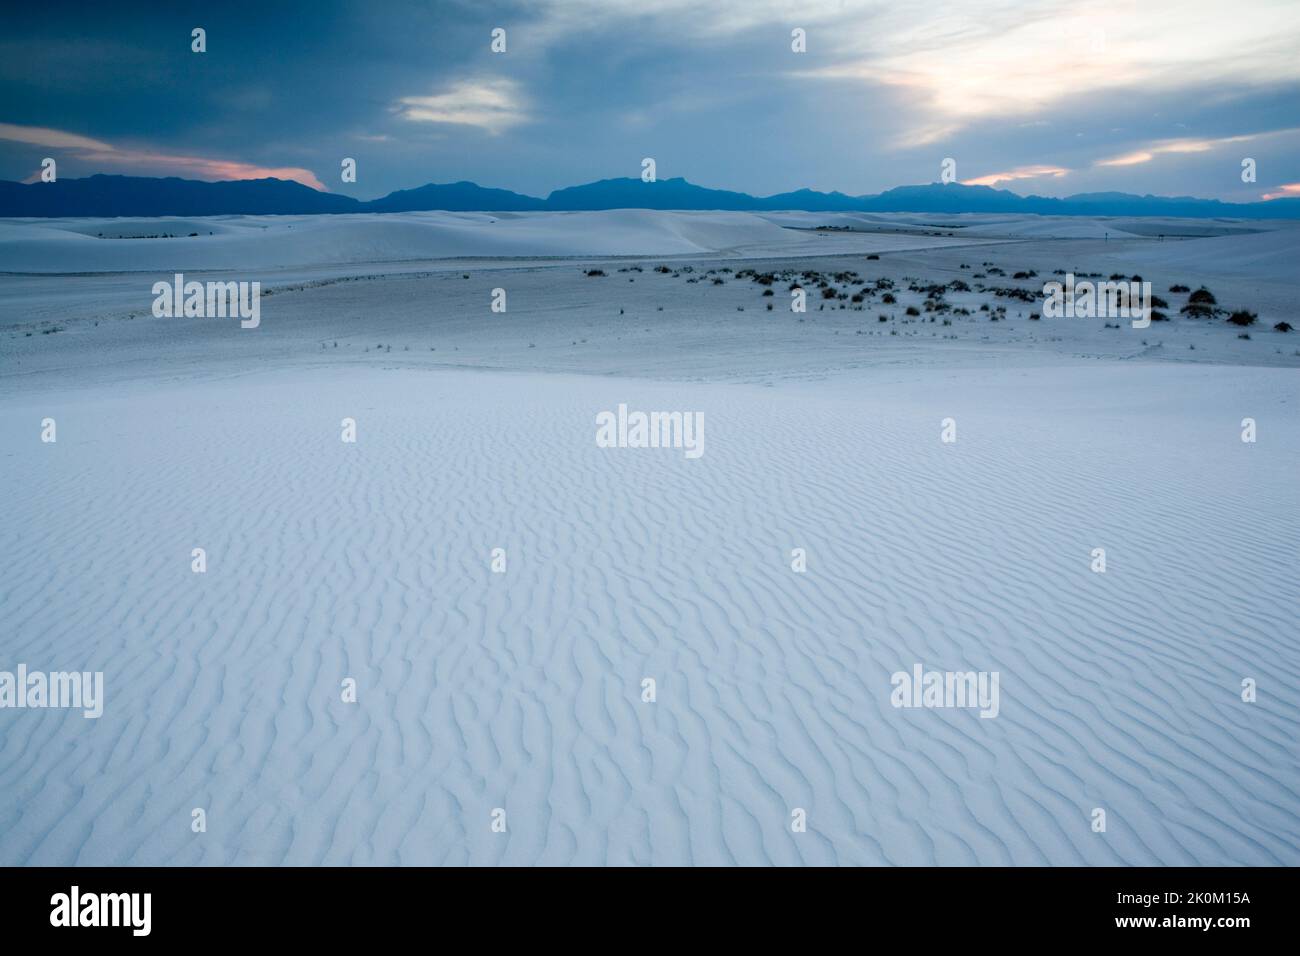 The gypsum dune fields of White Sands National Monument in New Mexico, backed by the San Andres Mountains Stock Photo